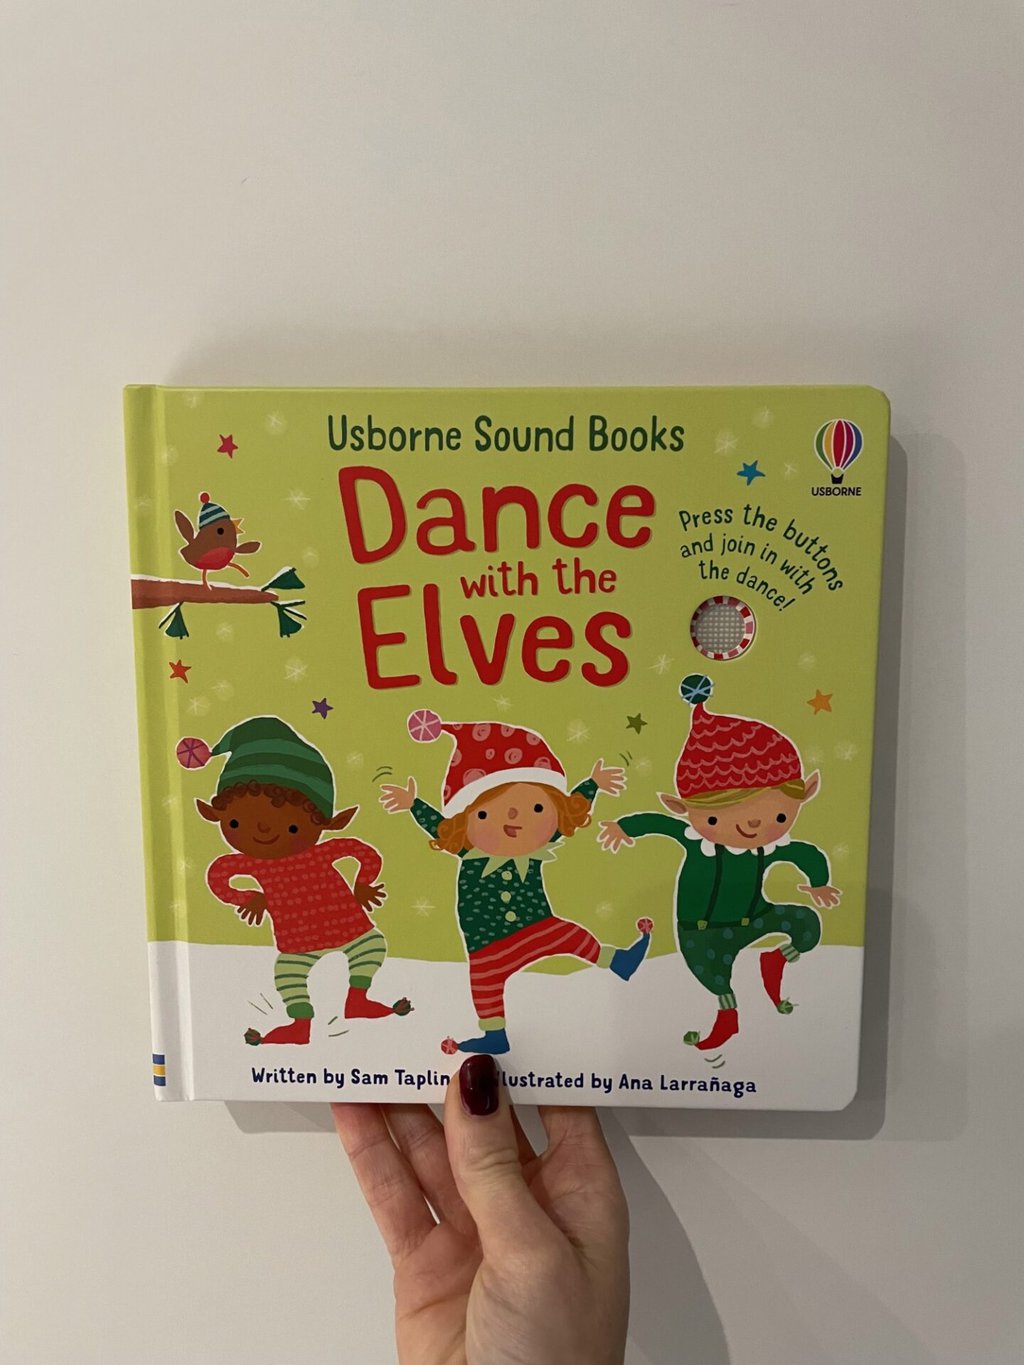 Dances with the Elves –